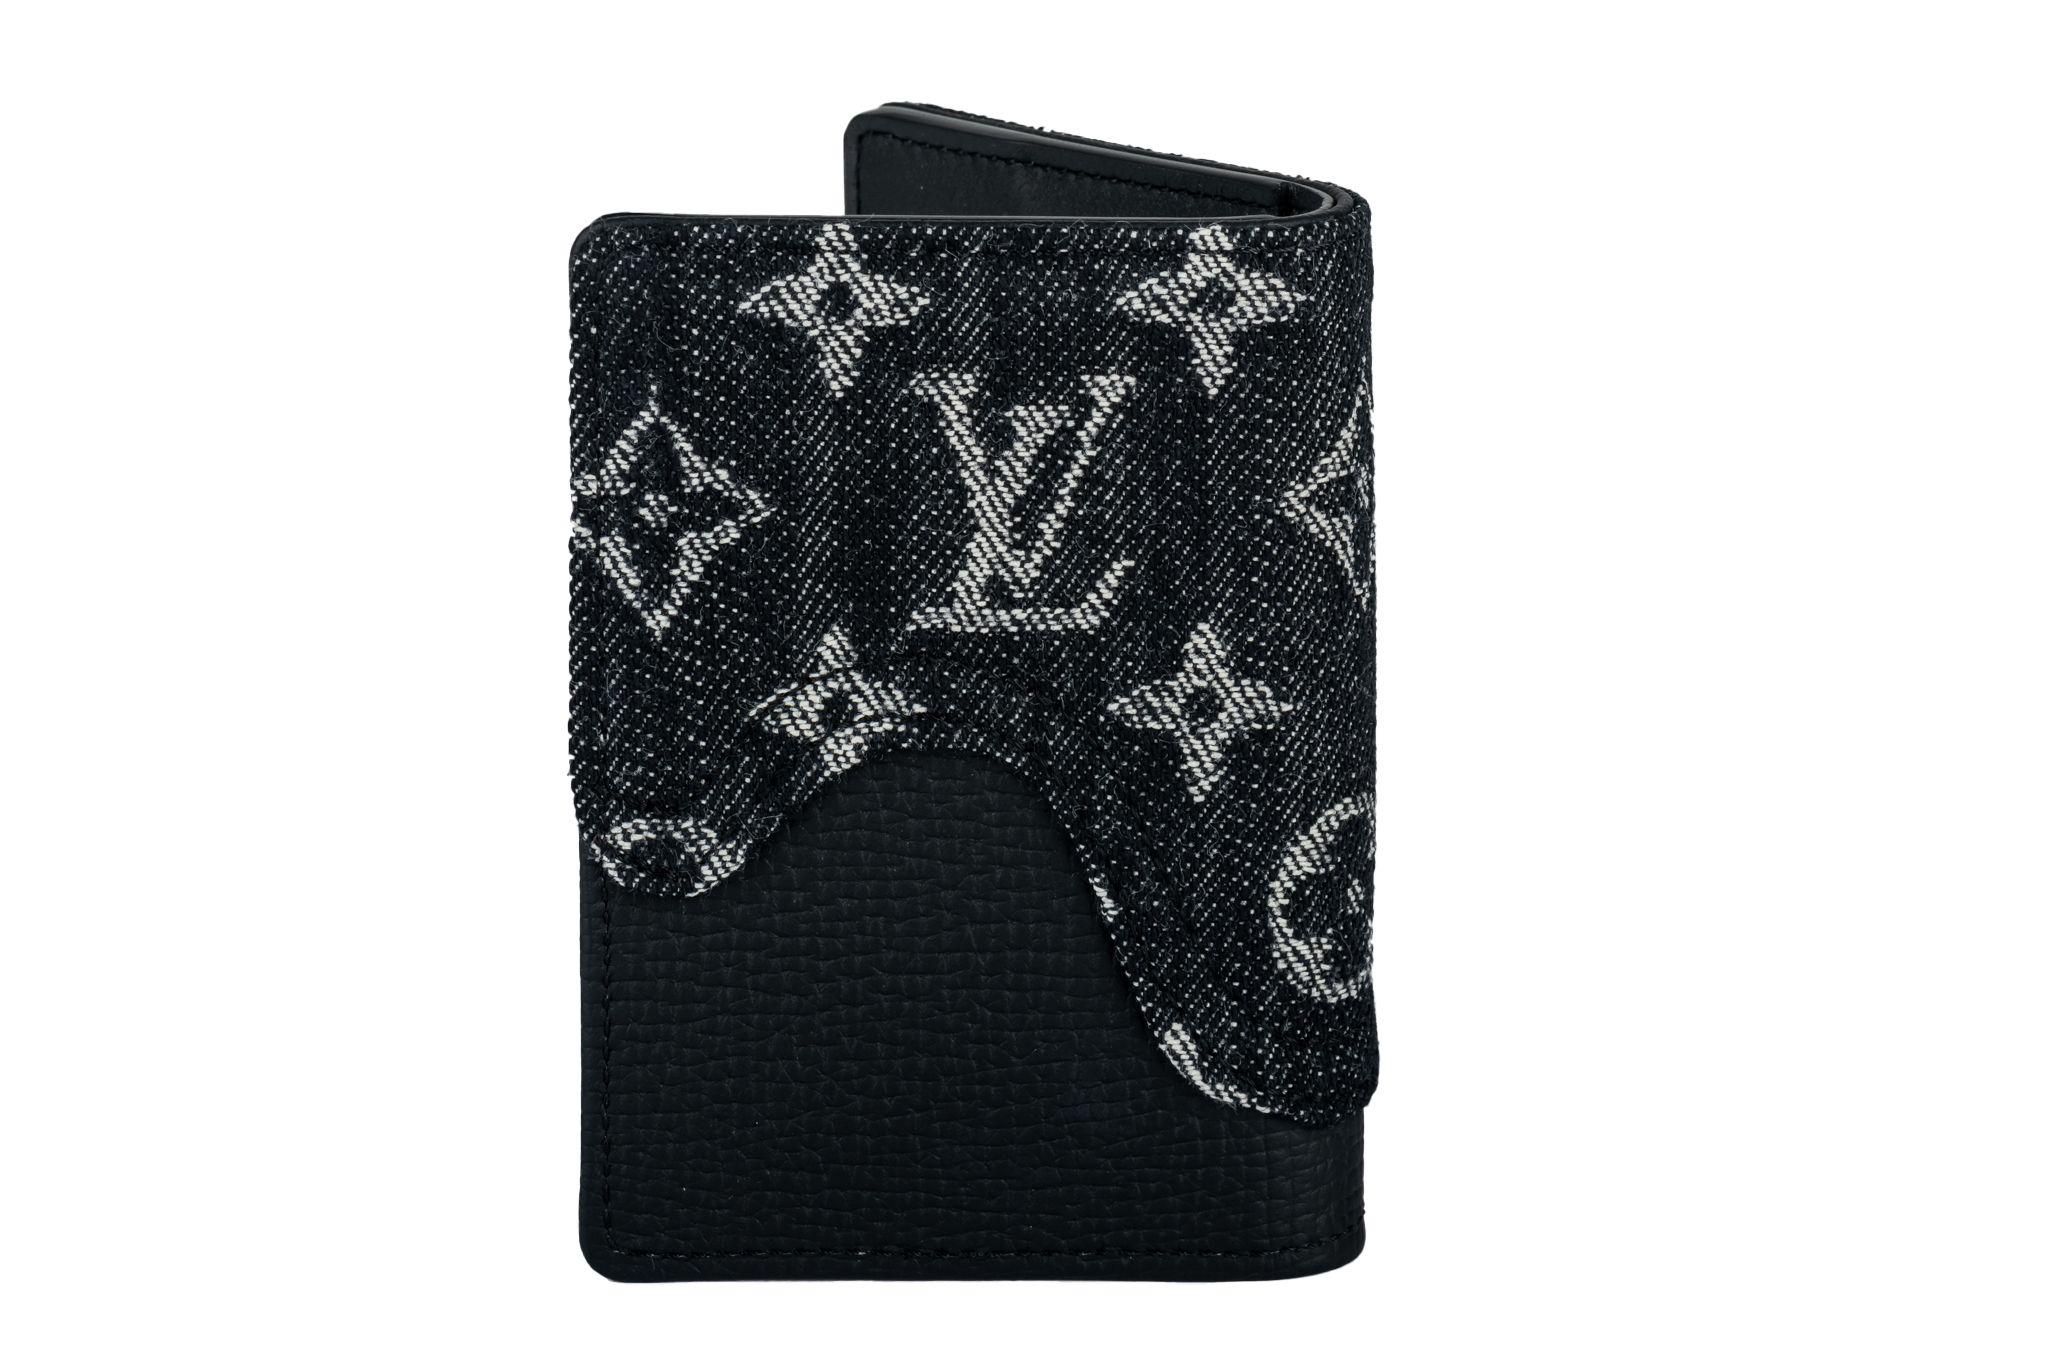 Louis Vuitton Virgil Abloh x NIGO Black Monogram Denim Drip and Taurillon Pocket Organizer from 2021. This piece is lined with black leather and was featured during the collaboration with Japanese artist NIGO. It has multiple compartments and a